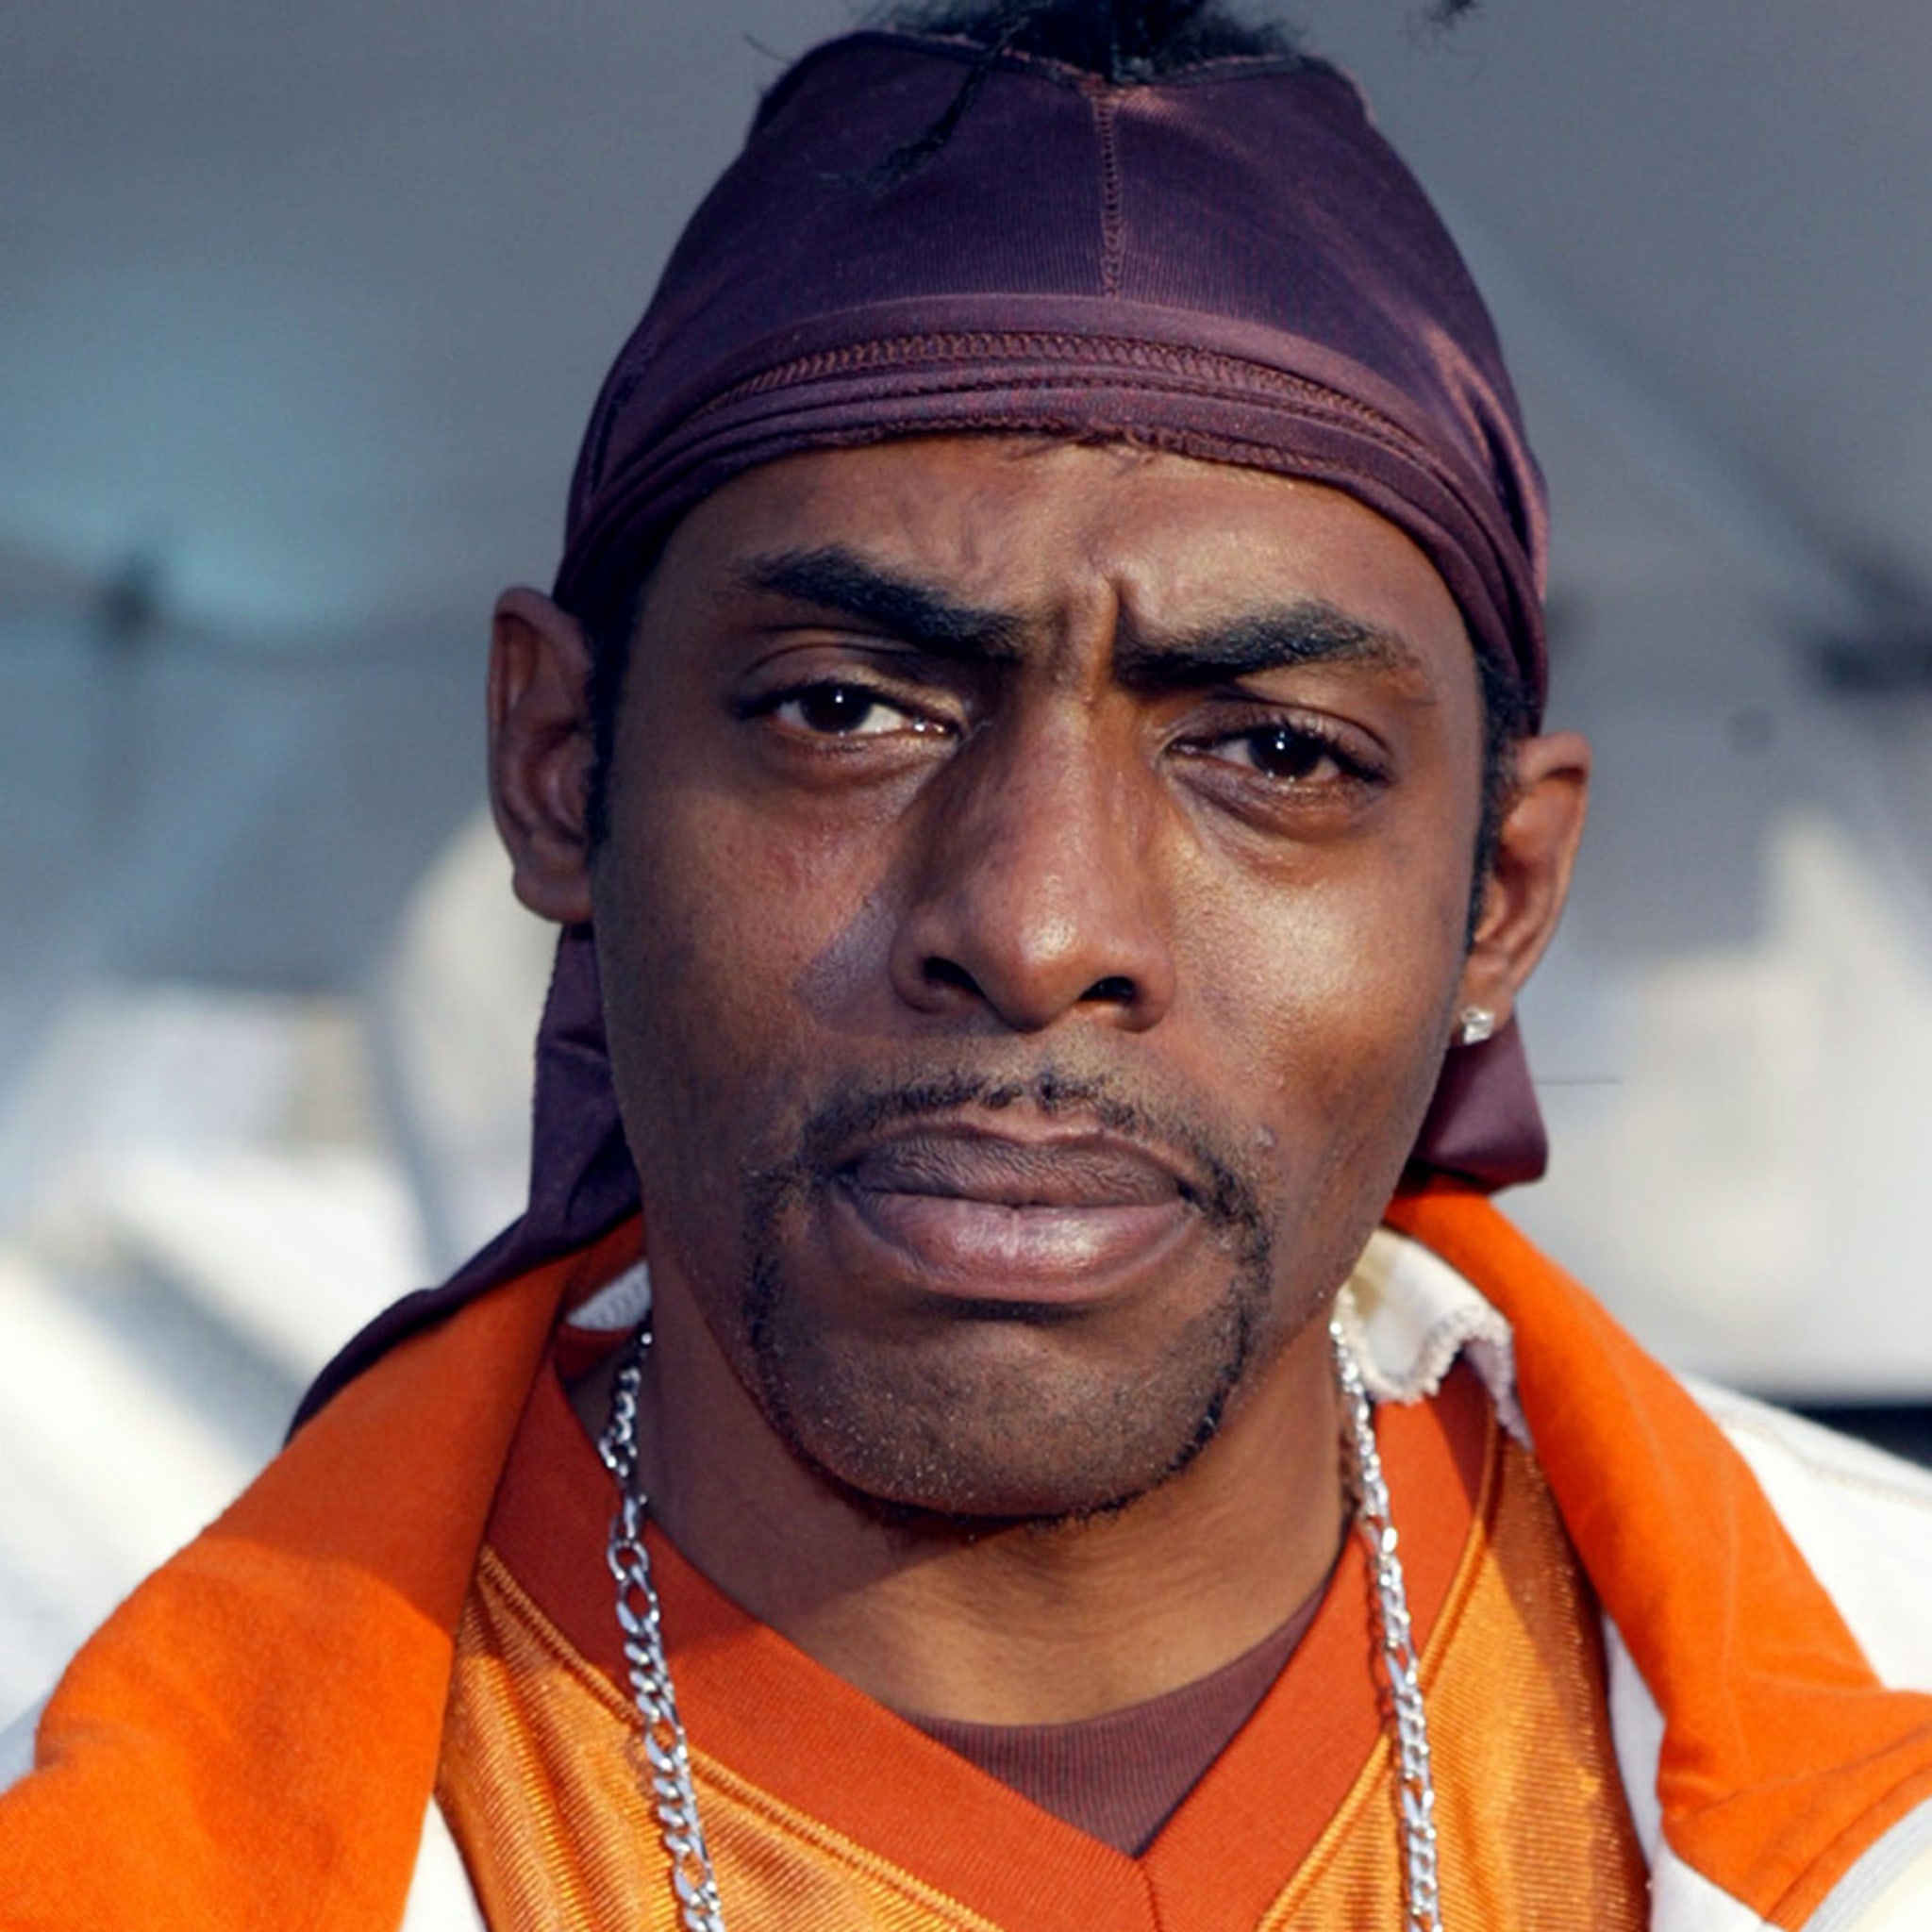 Coolio Struggled with Severe Asthma, Friends Believe It Contributed to Death